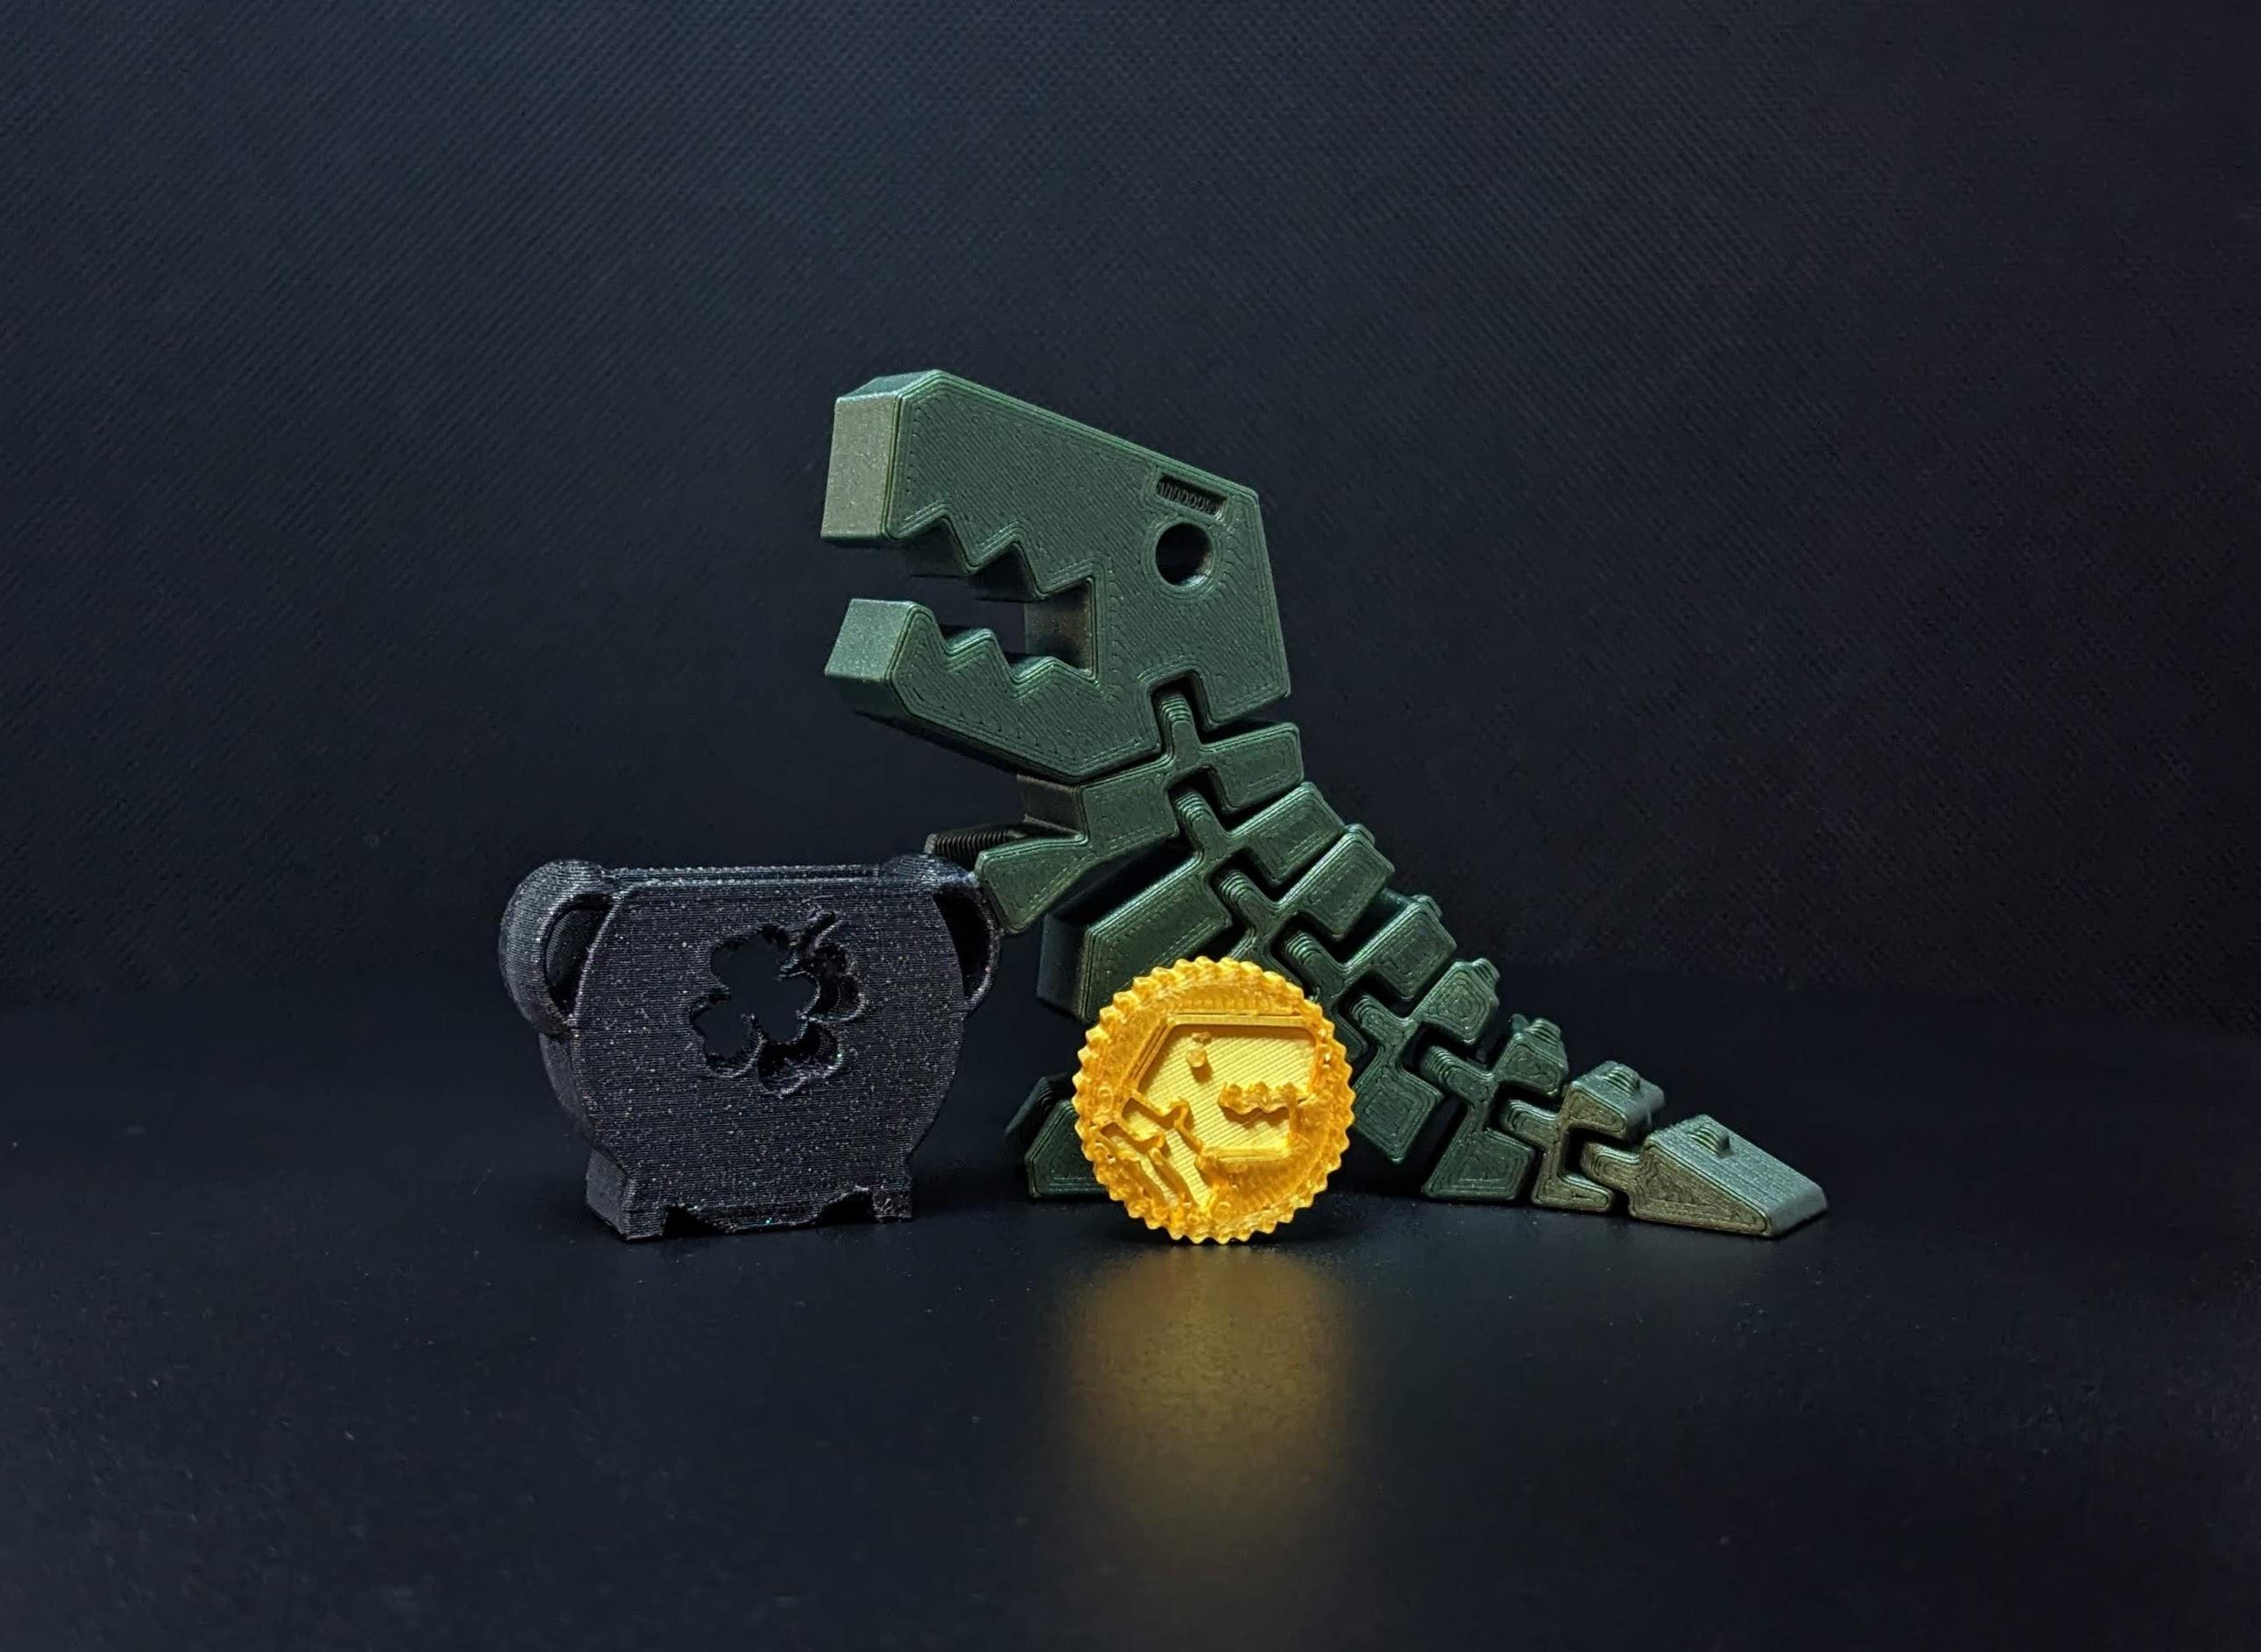 Flexi Rex Pot of Gold St. Patrick’s Day - 0.4 Nozzle on 0.2 LH with 10% infill. Made here with Polymaker PolyLite PLA "Galaxy Black", "LM Sparkle Green", and "Silk Gold". - 3d model